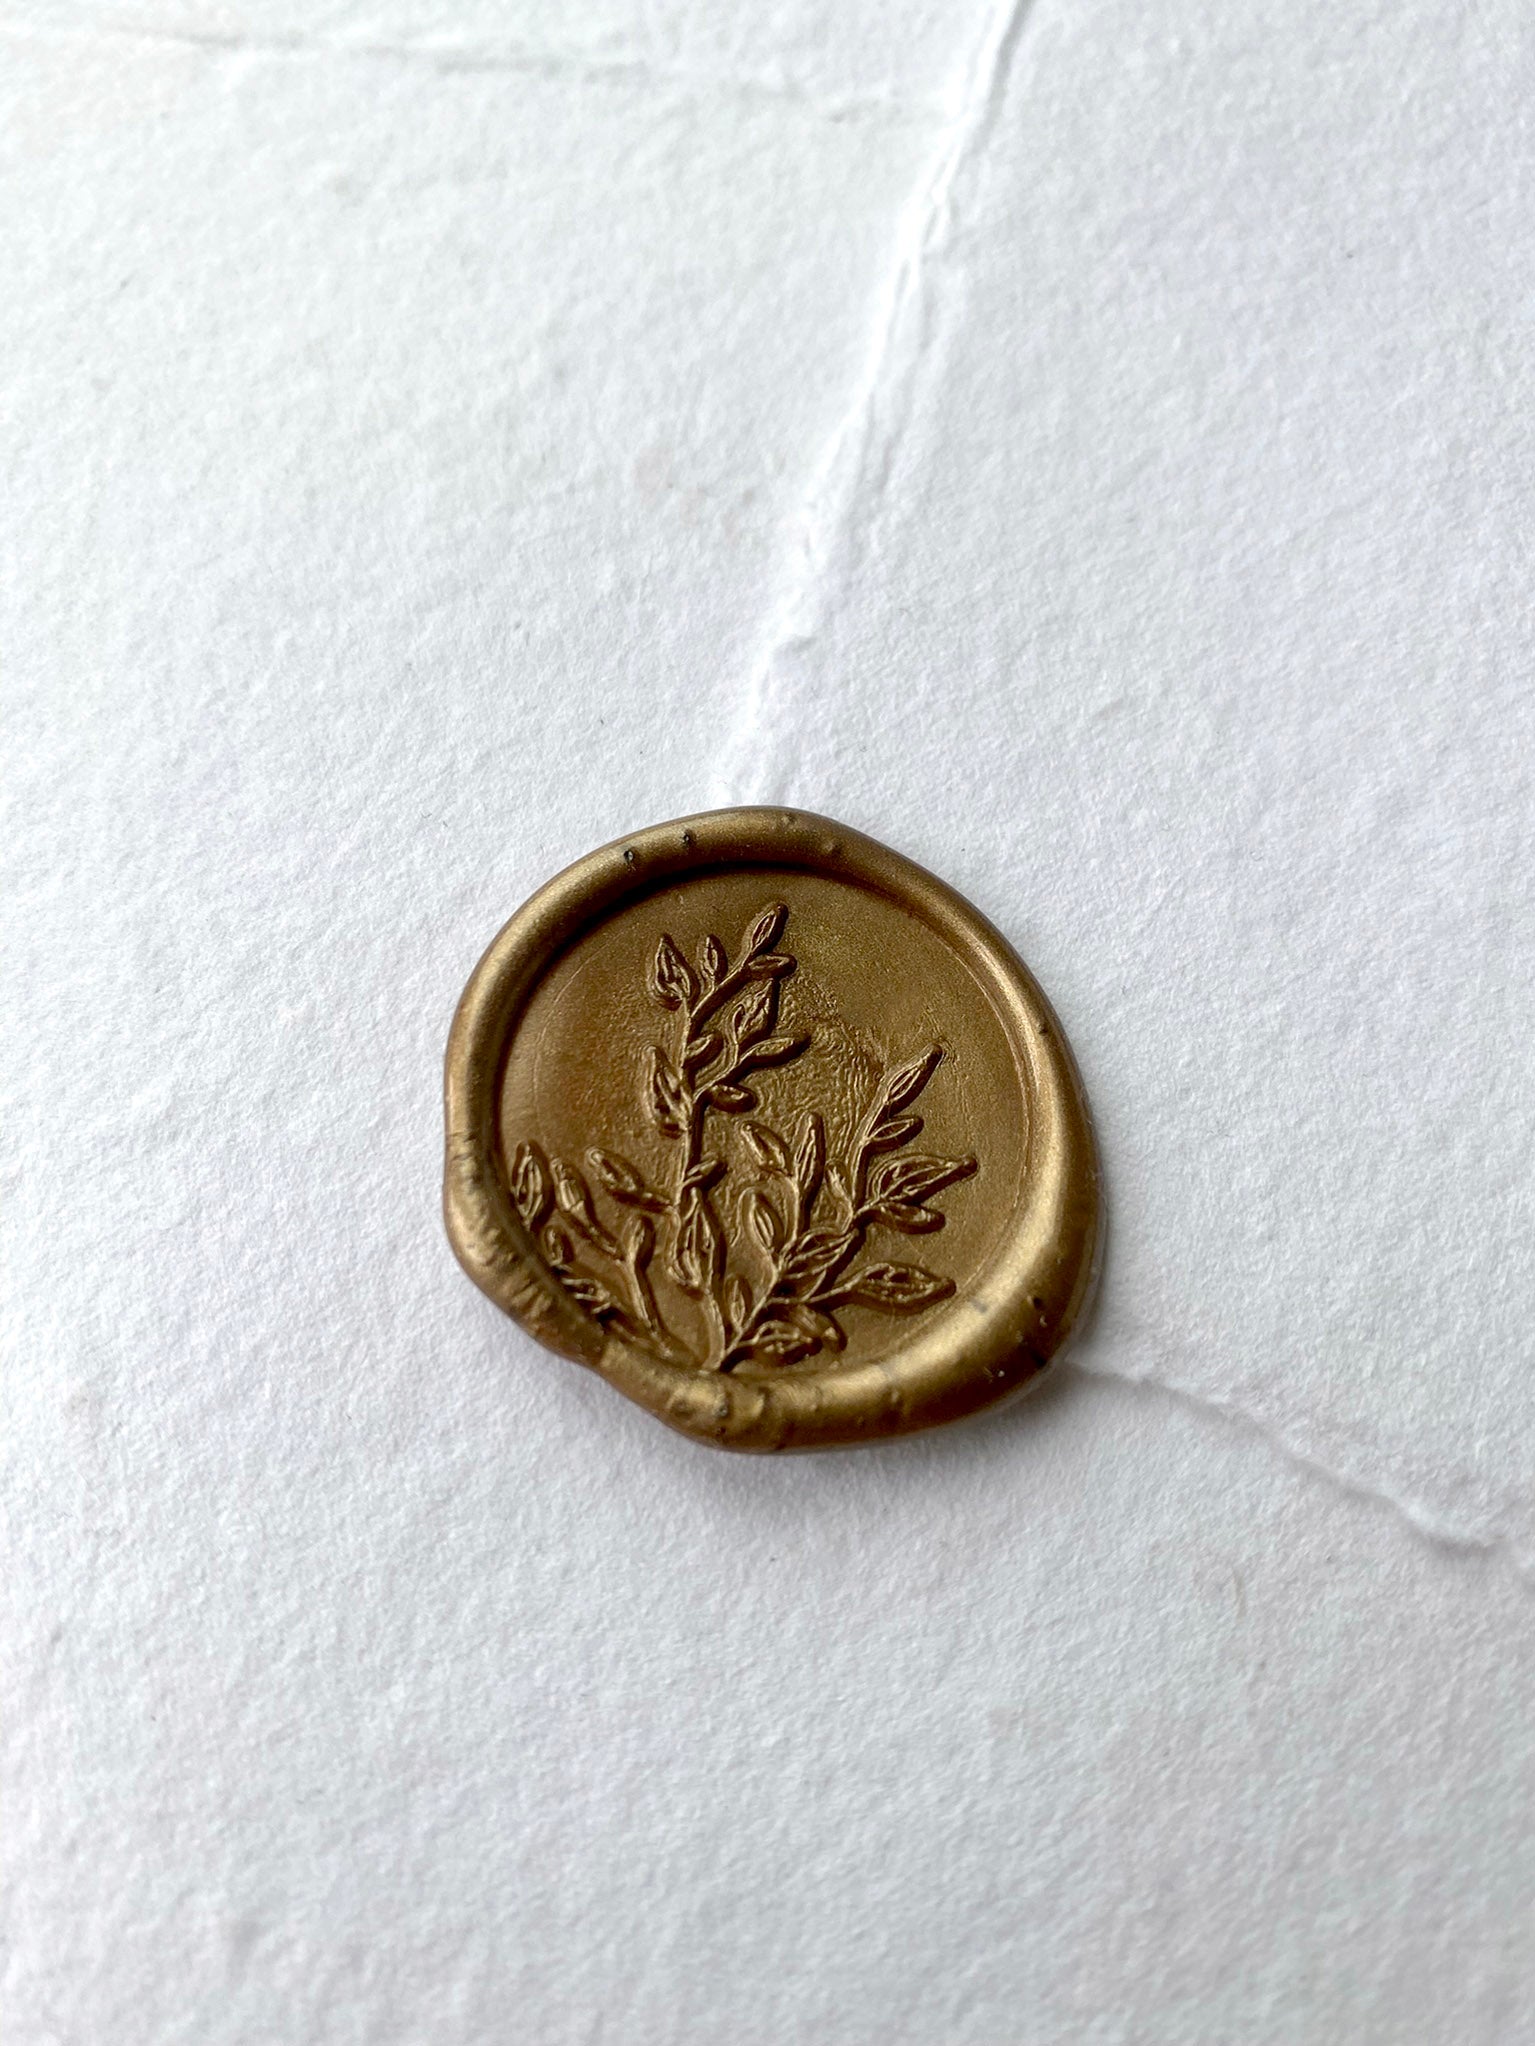 zoomed in leaf wax seal in bronze on white handmade paper envelope 